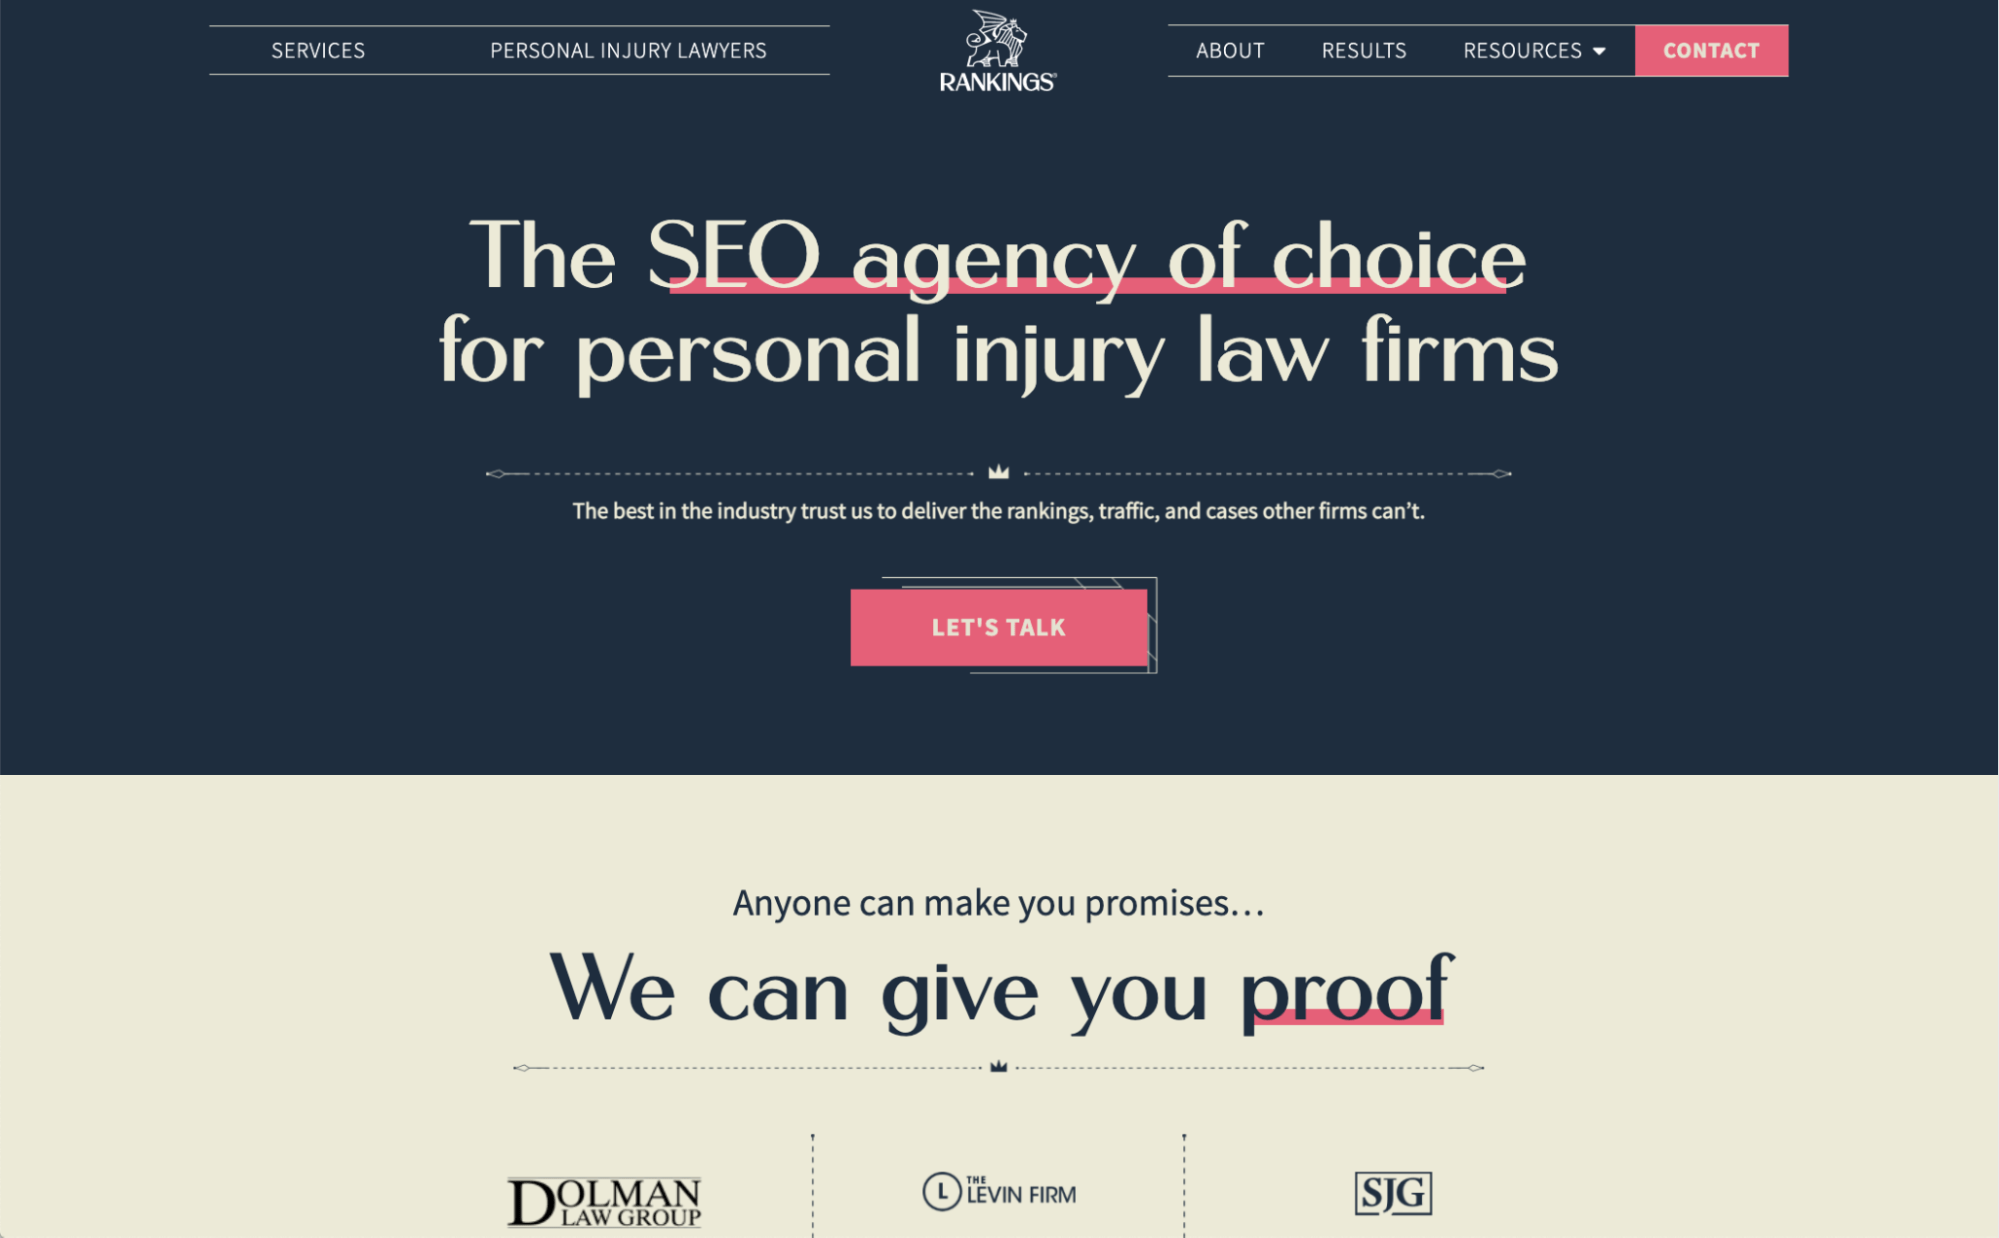 SEO agency focused on lawyers and law firms